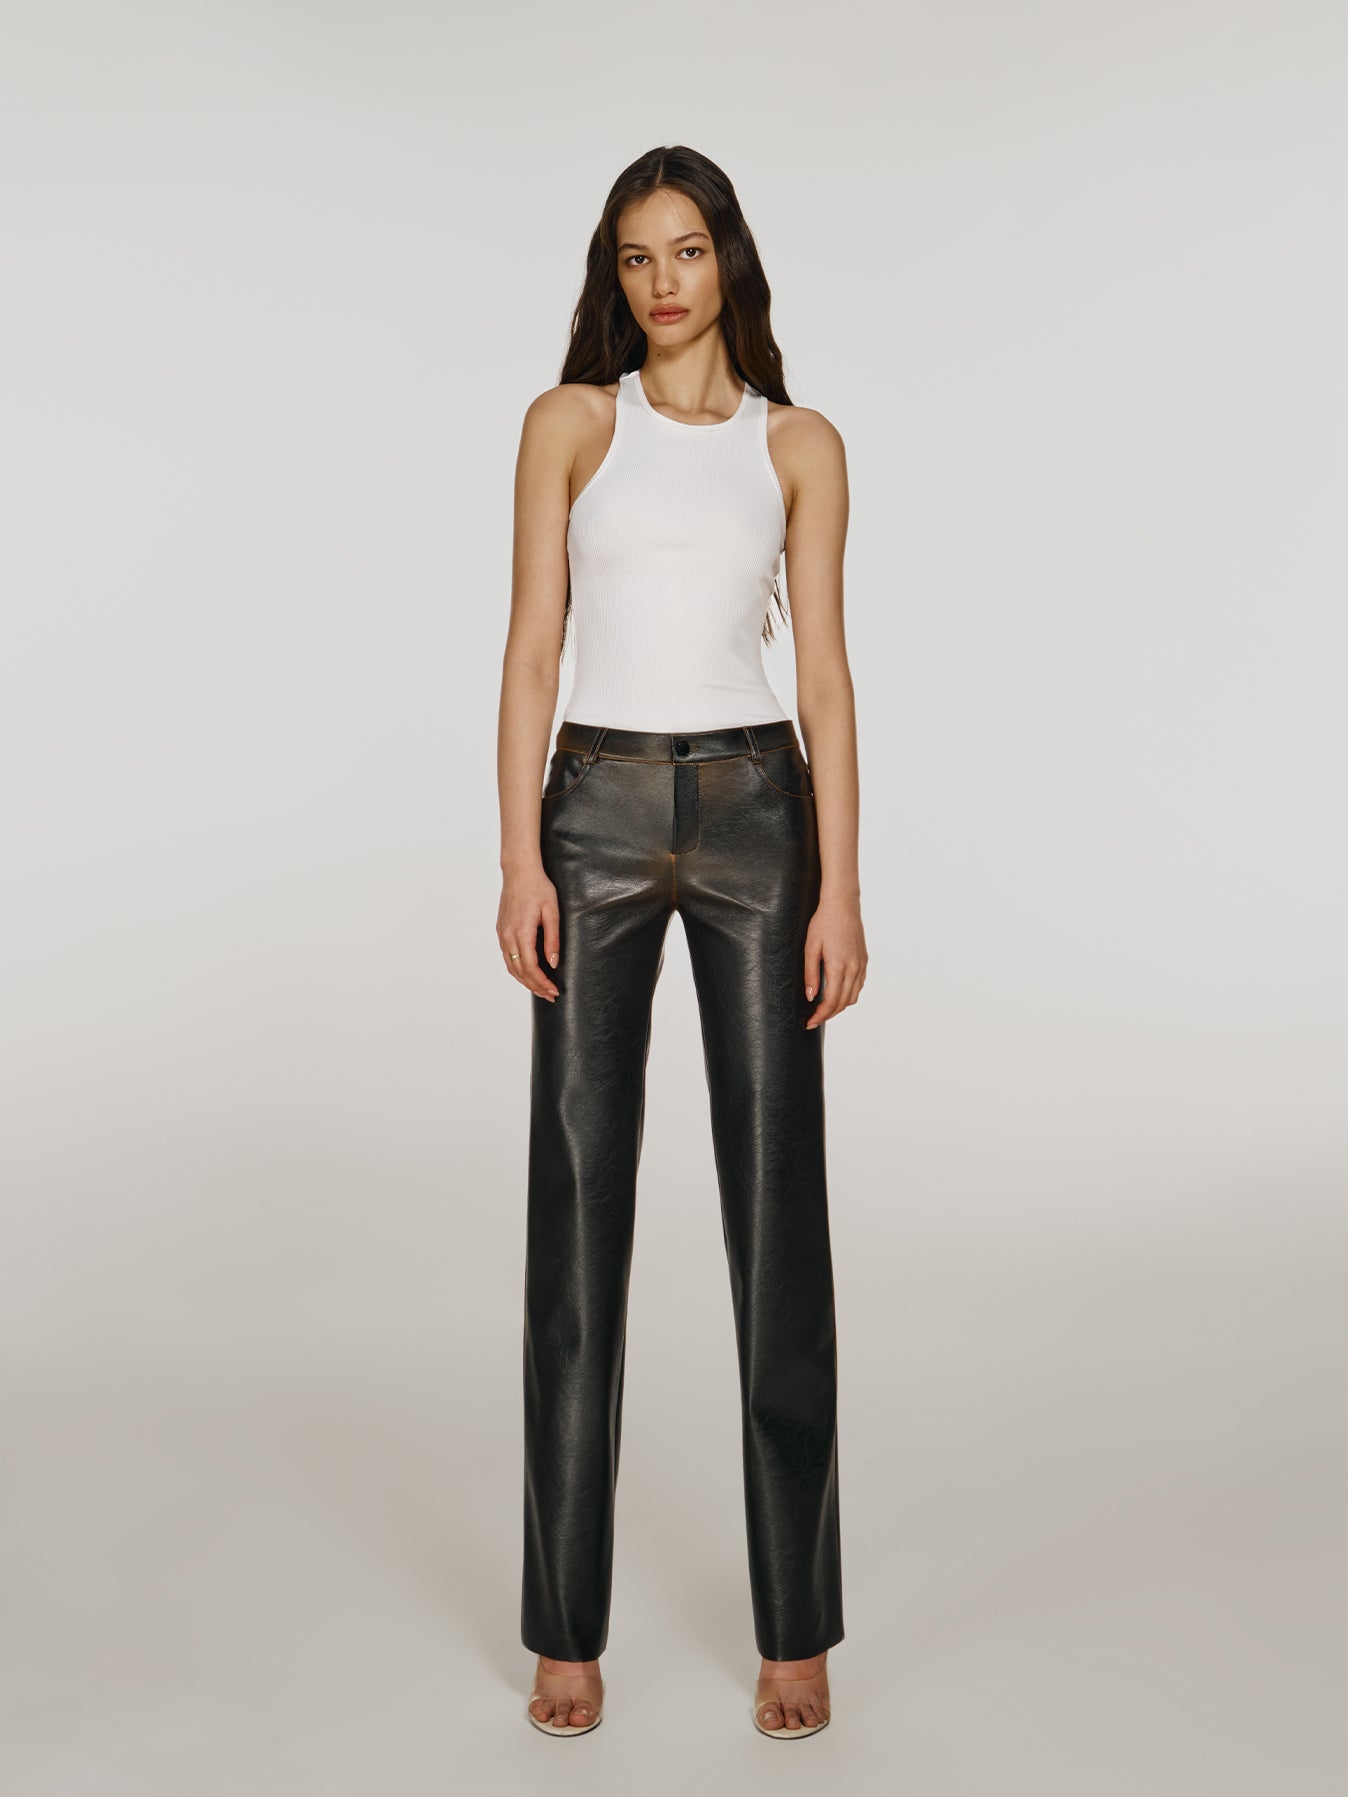 Full shot of a girl in a white viscose tank top and brown vegan leather pants with mid rise